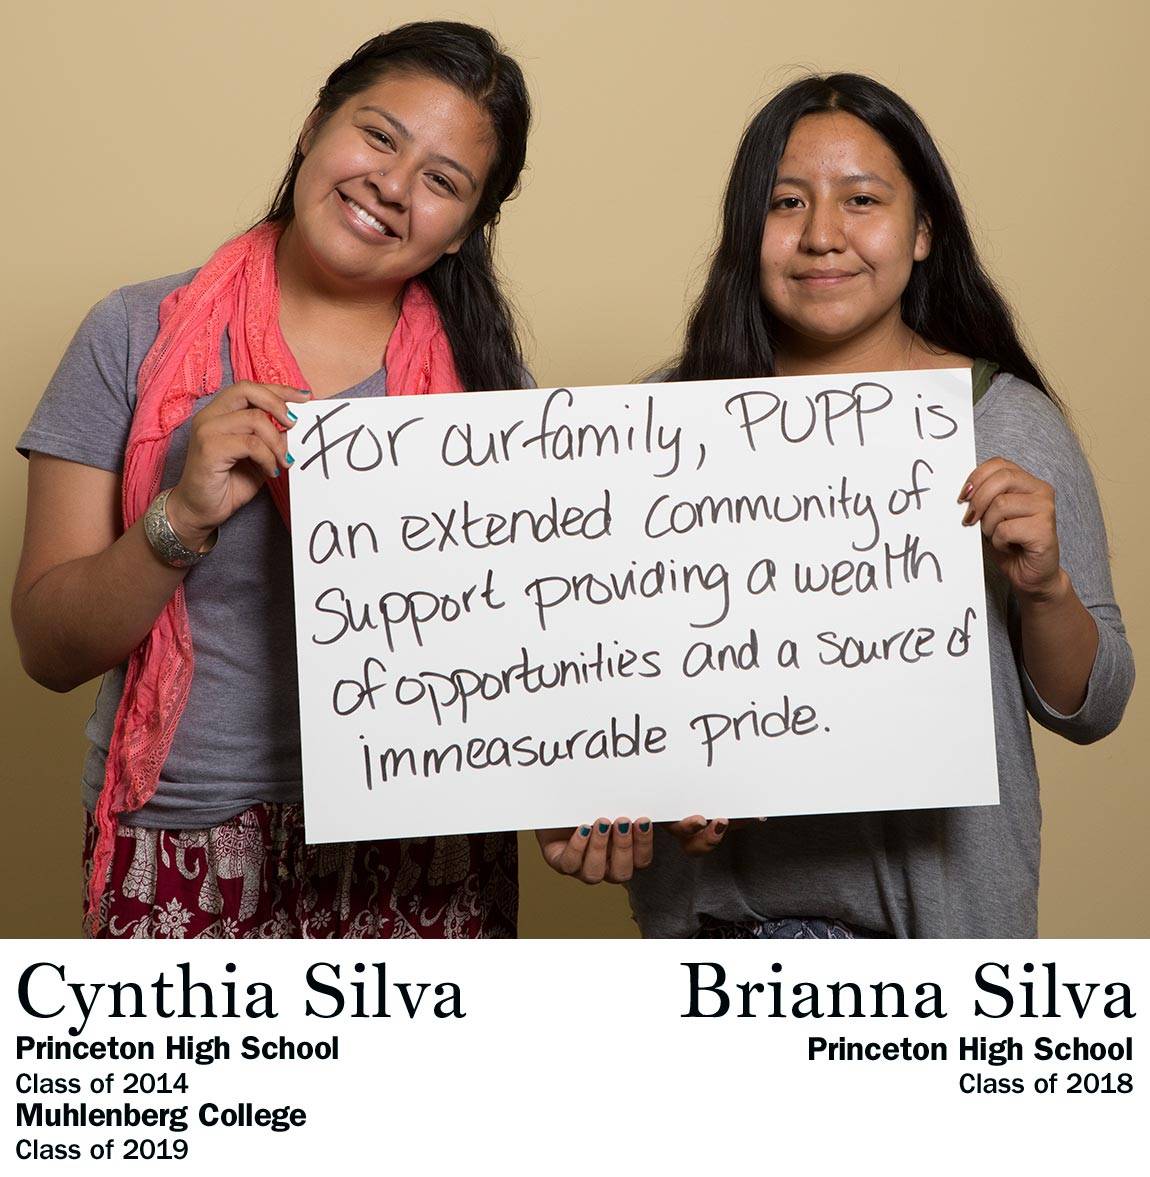  “For our family, PUPP is an extended community of support providing a wealth of opportunities and a source of immeasurable pride.” Cynthia Silva, Princeton High School Class of 2014, Muhlenberg College Class of 2019 AND Brianna Silva, Princeton High School Class of 2018.